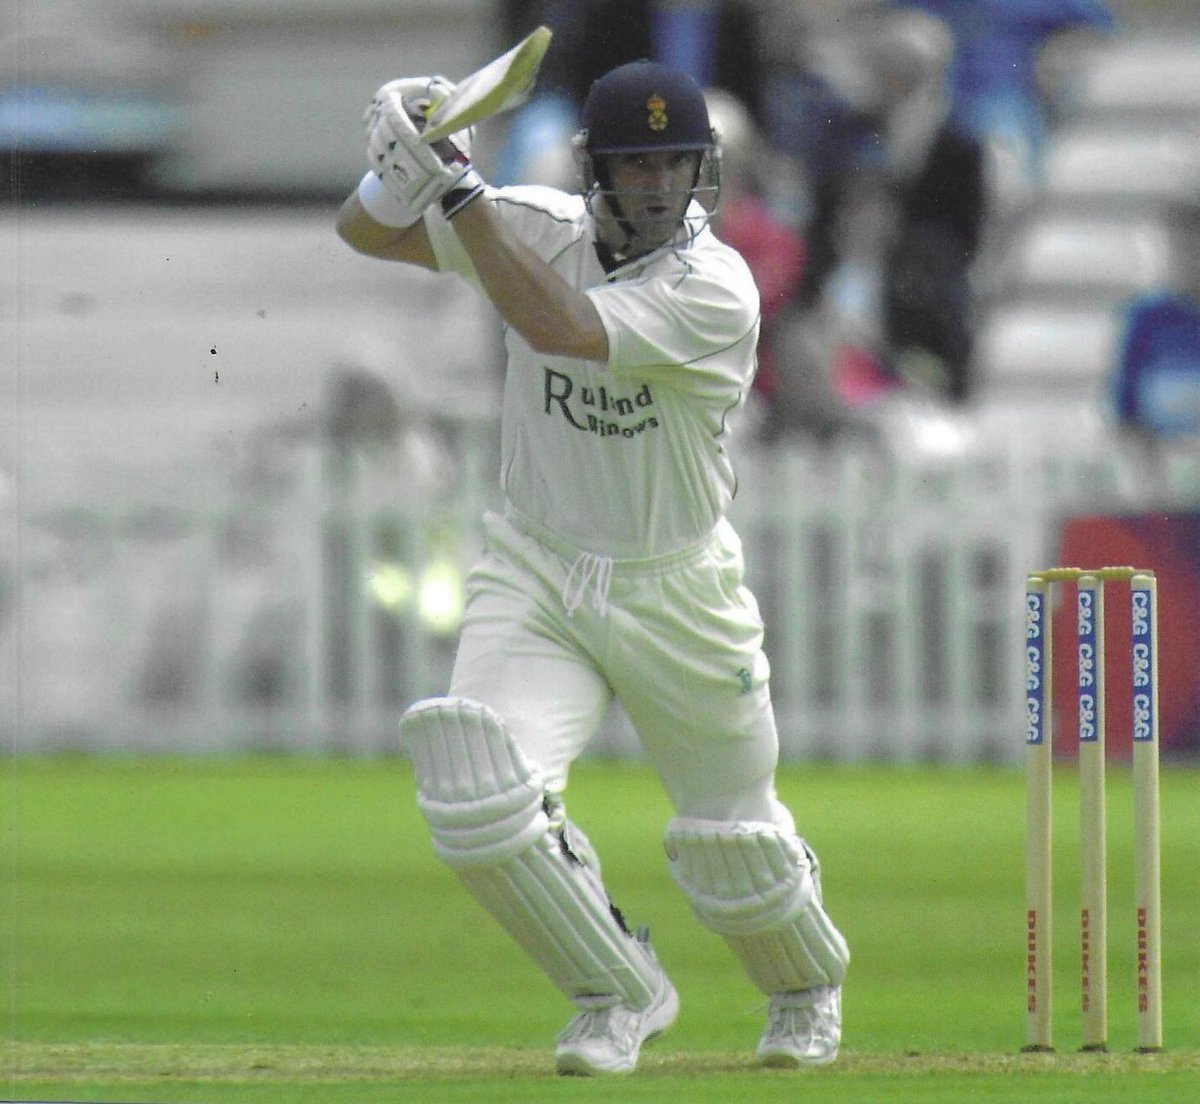 On This Day in 2002 @DerbyshireCCC scored 487-7 on the opening day of their championship game against Northamptonshire at Derby, their 3rd highest total in a day and highest at Derby. Top-scorer with a magnificent 230 was @MjDiVa5 - Northants won the toss...